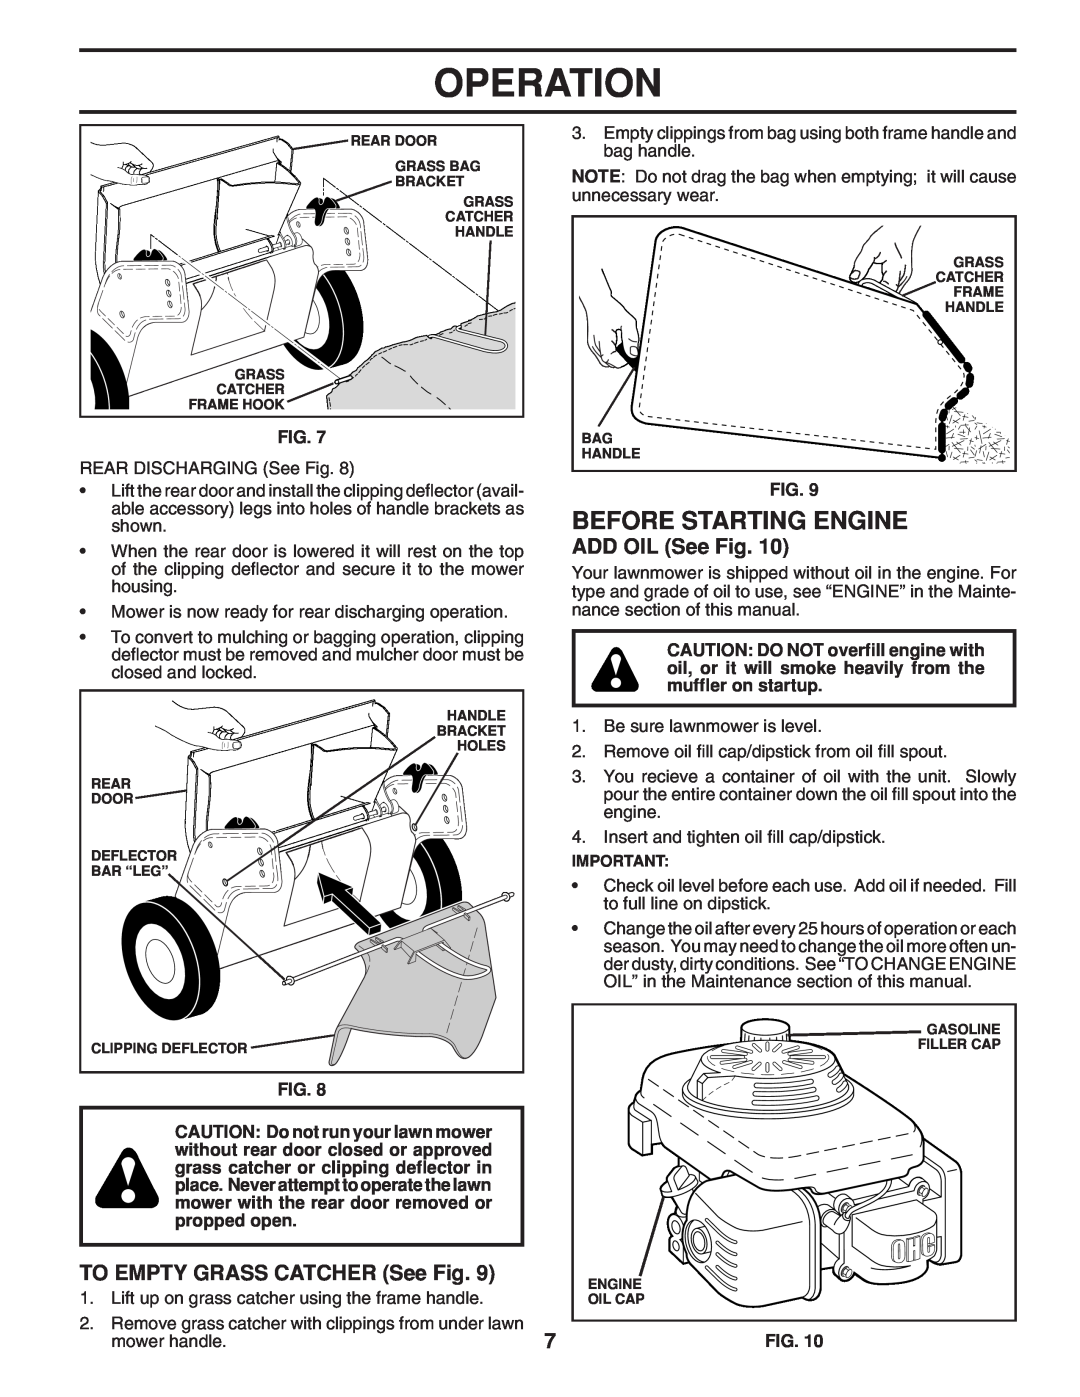 Husqvarna 961430097 manual Before Starting Engine, TO EMPTY GRASS CATCHER See Fig, ADD OIL See Fig, Operation 